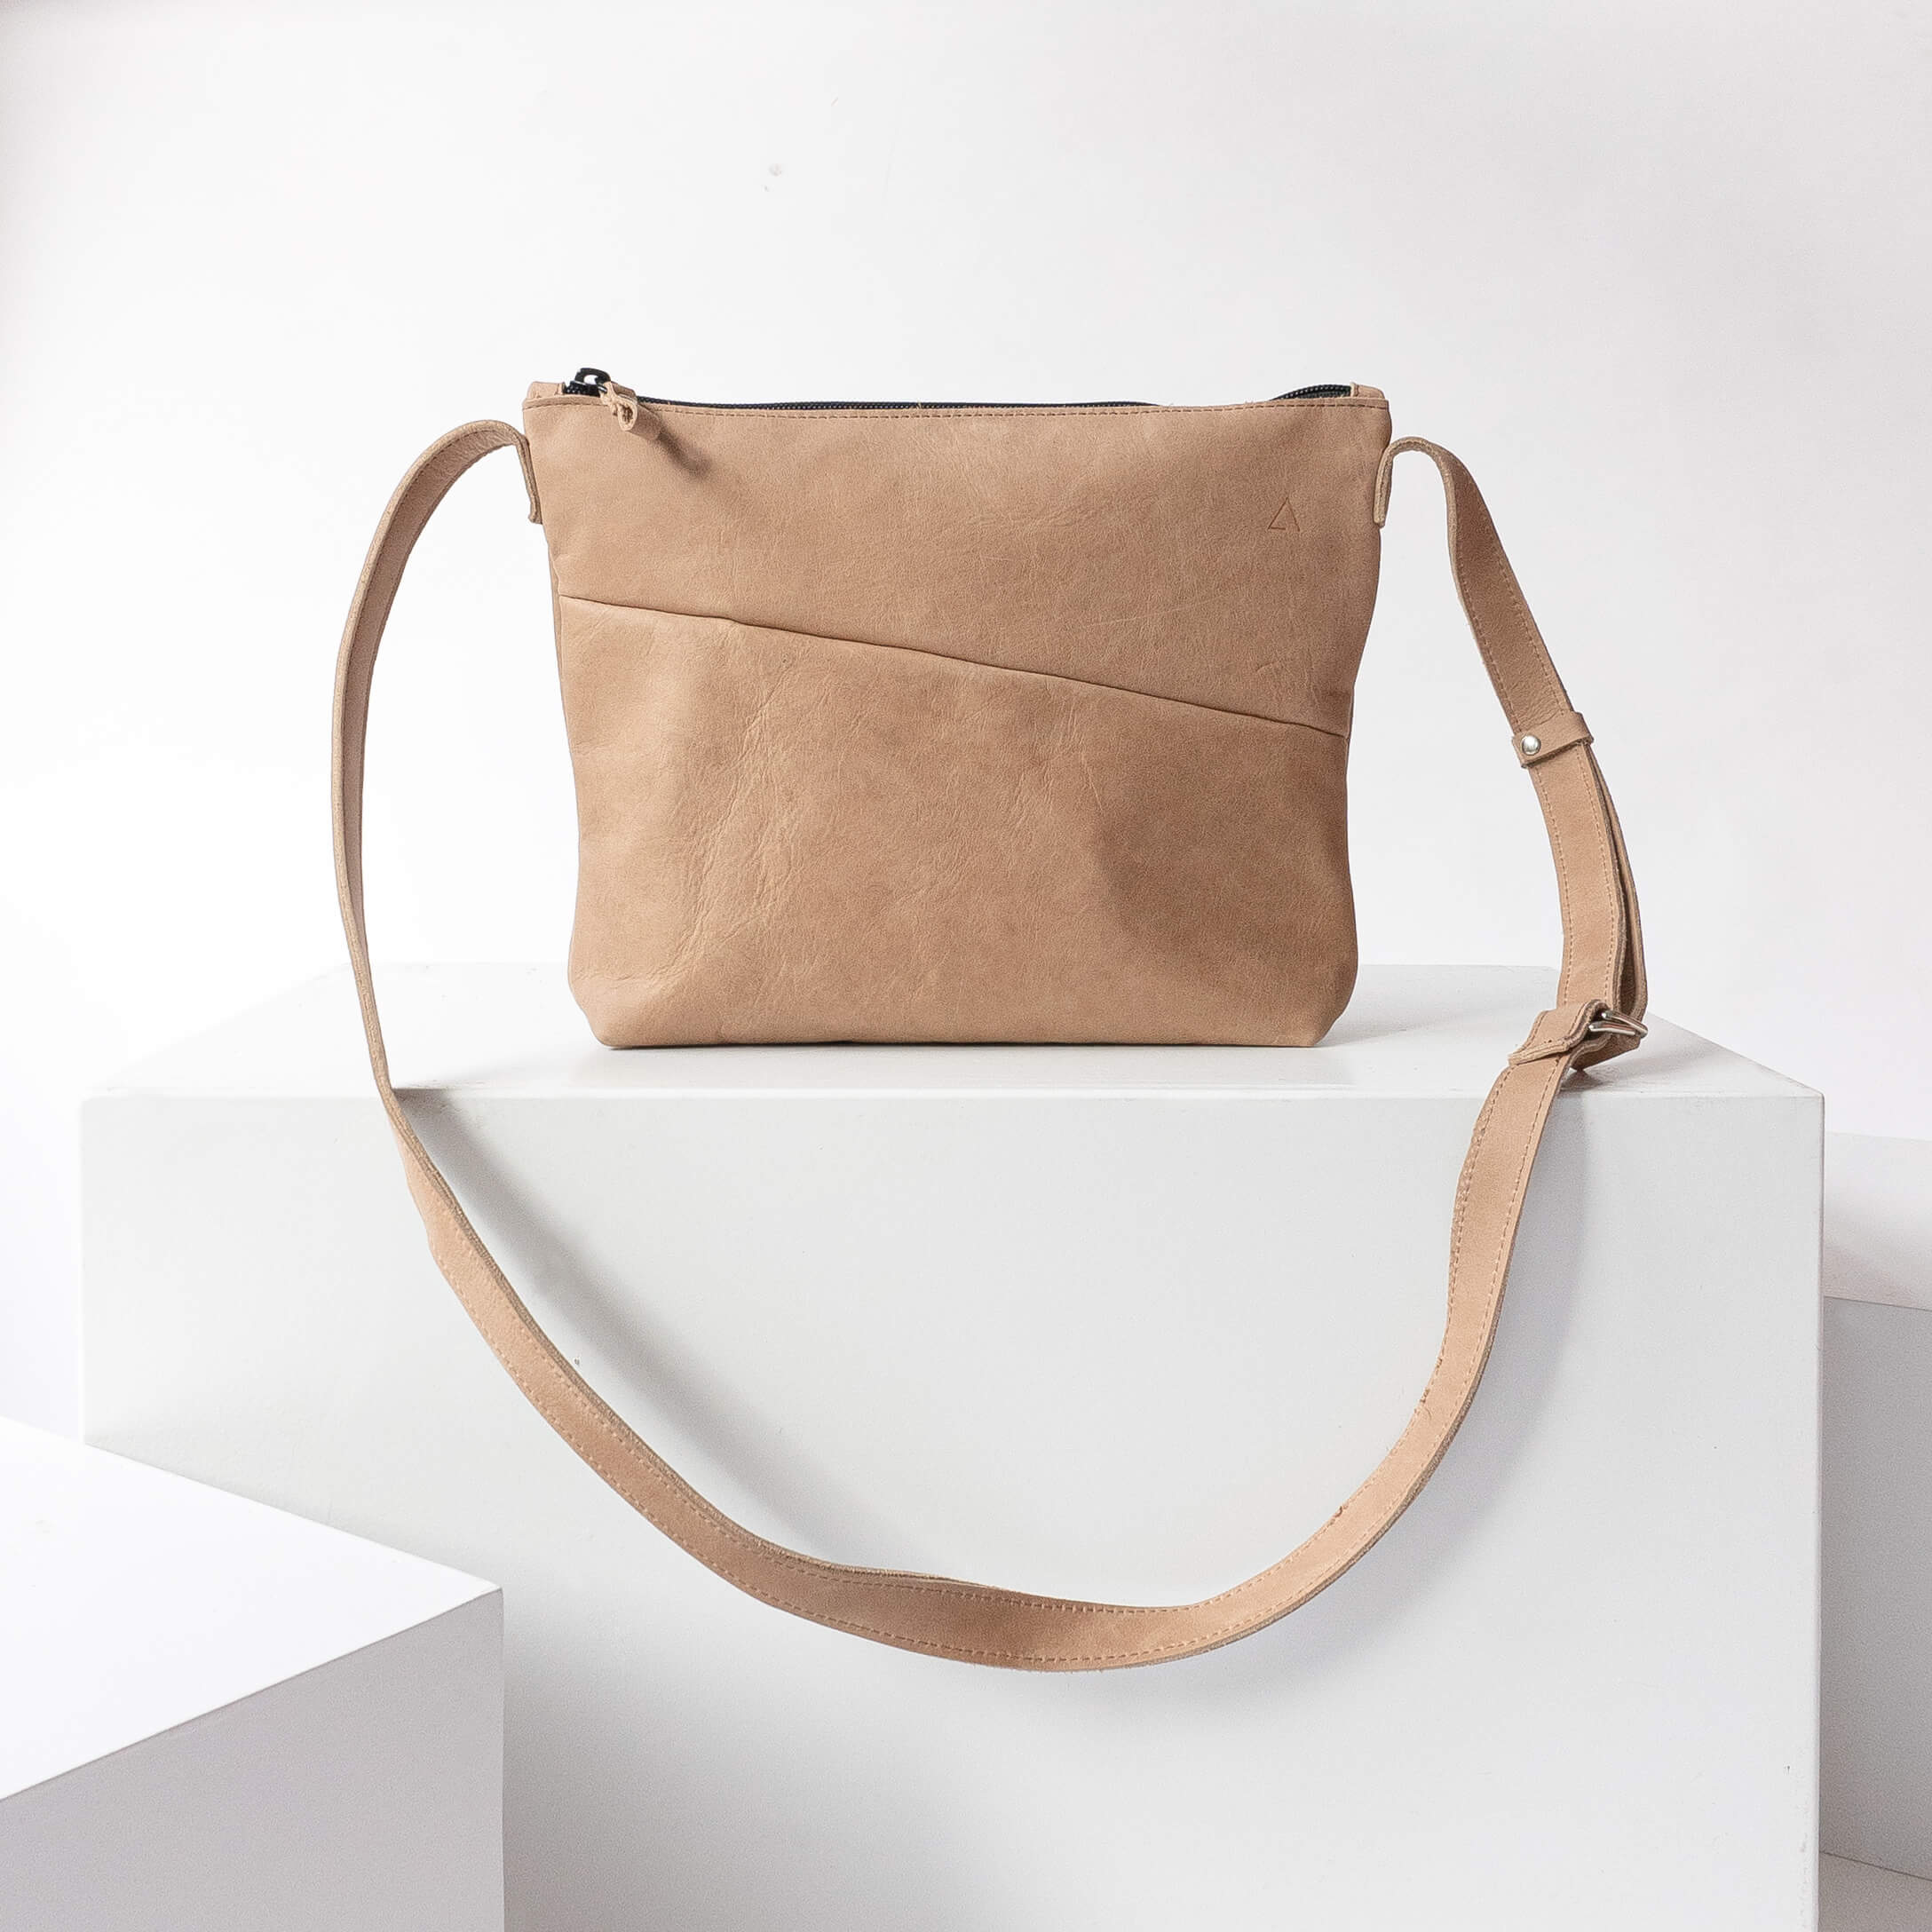 Shoulder bag IDA made of sustainable natural leather in light brown standing on block from the front